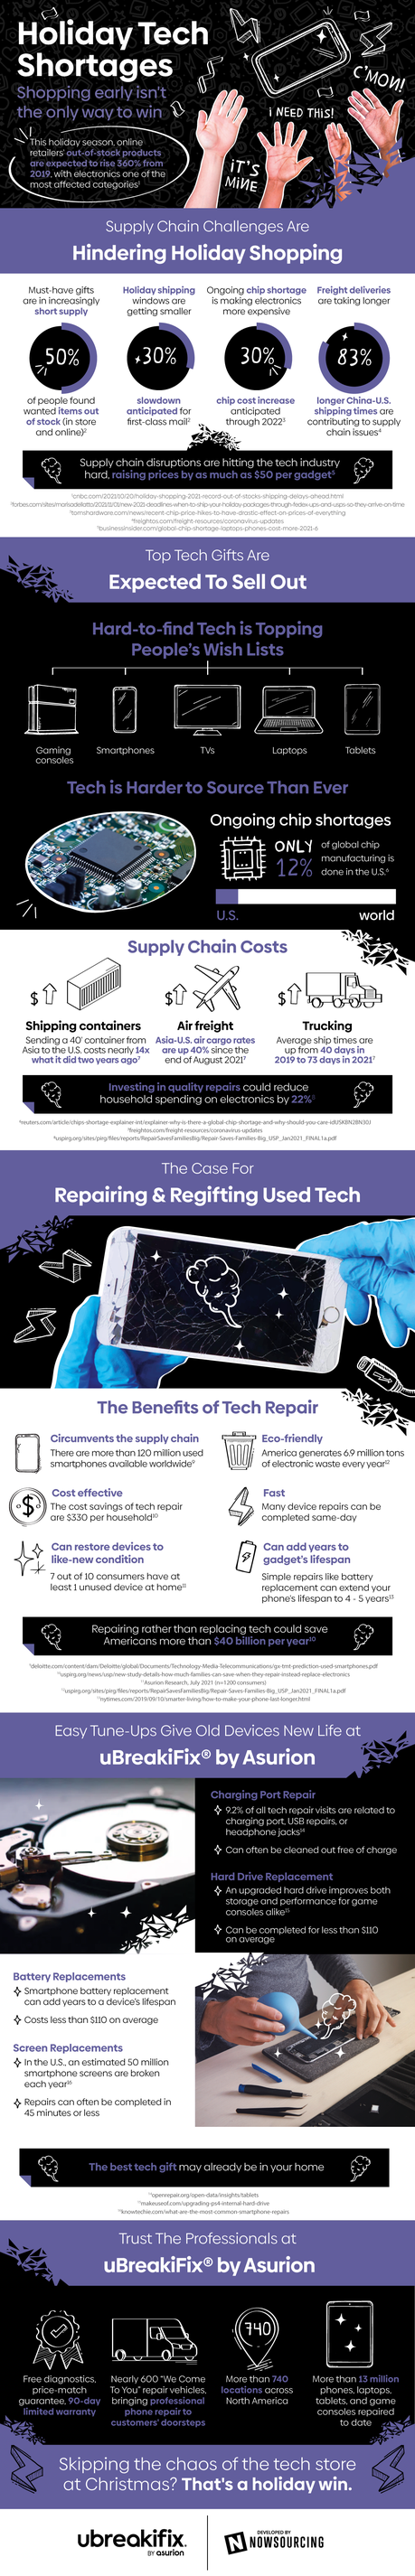 Holiday Tech Shortages: Shopping Early Isn’t the Only Way to Win [infographic]